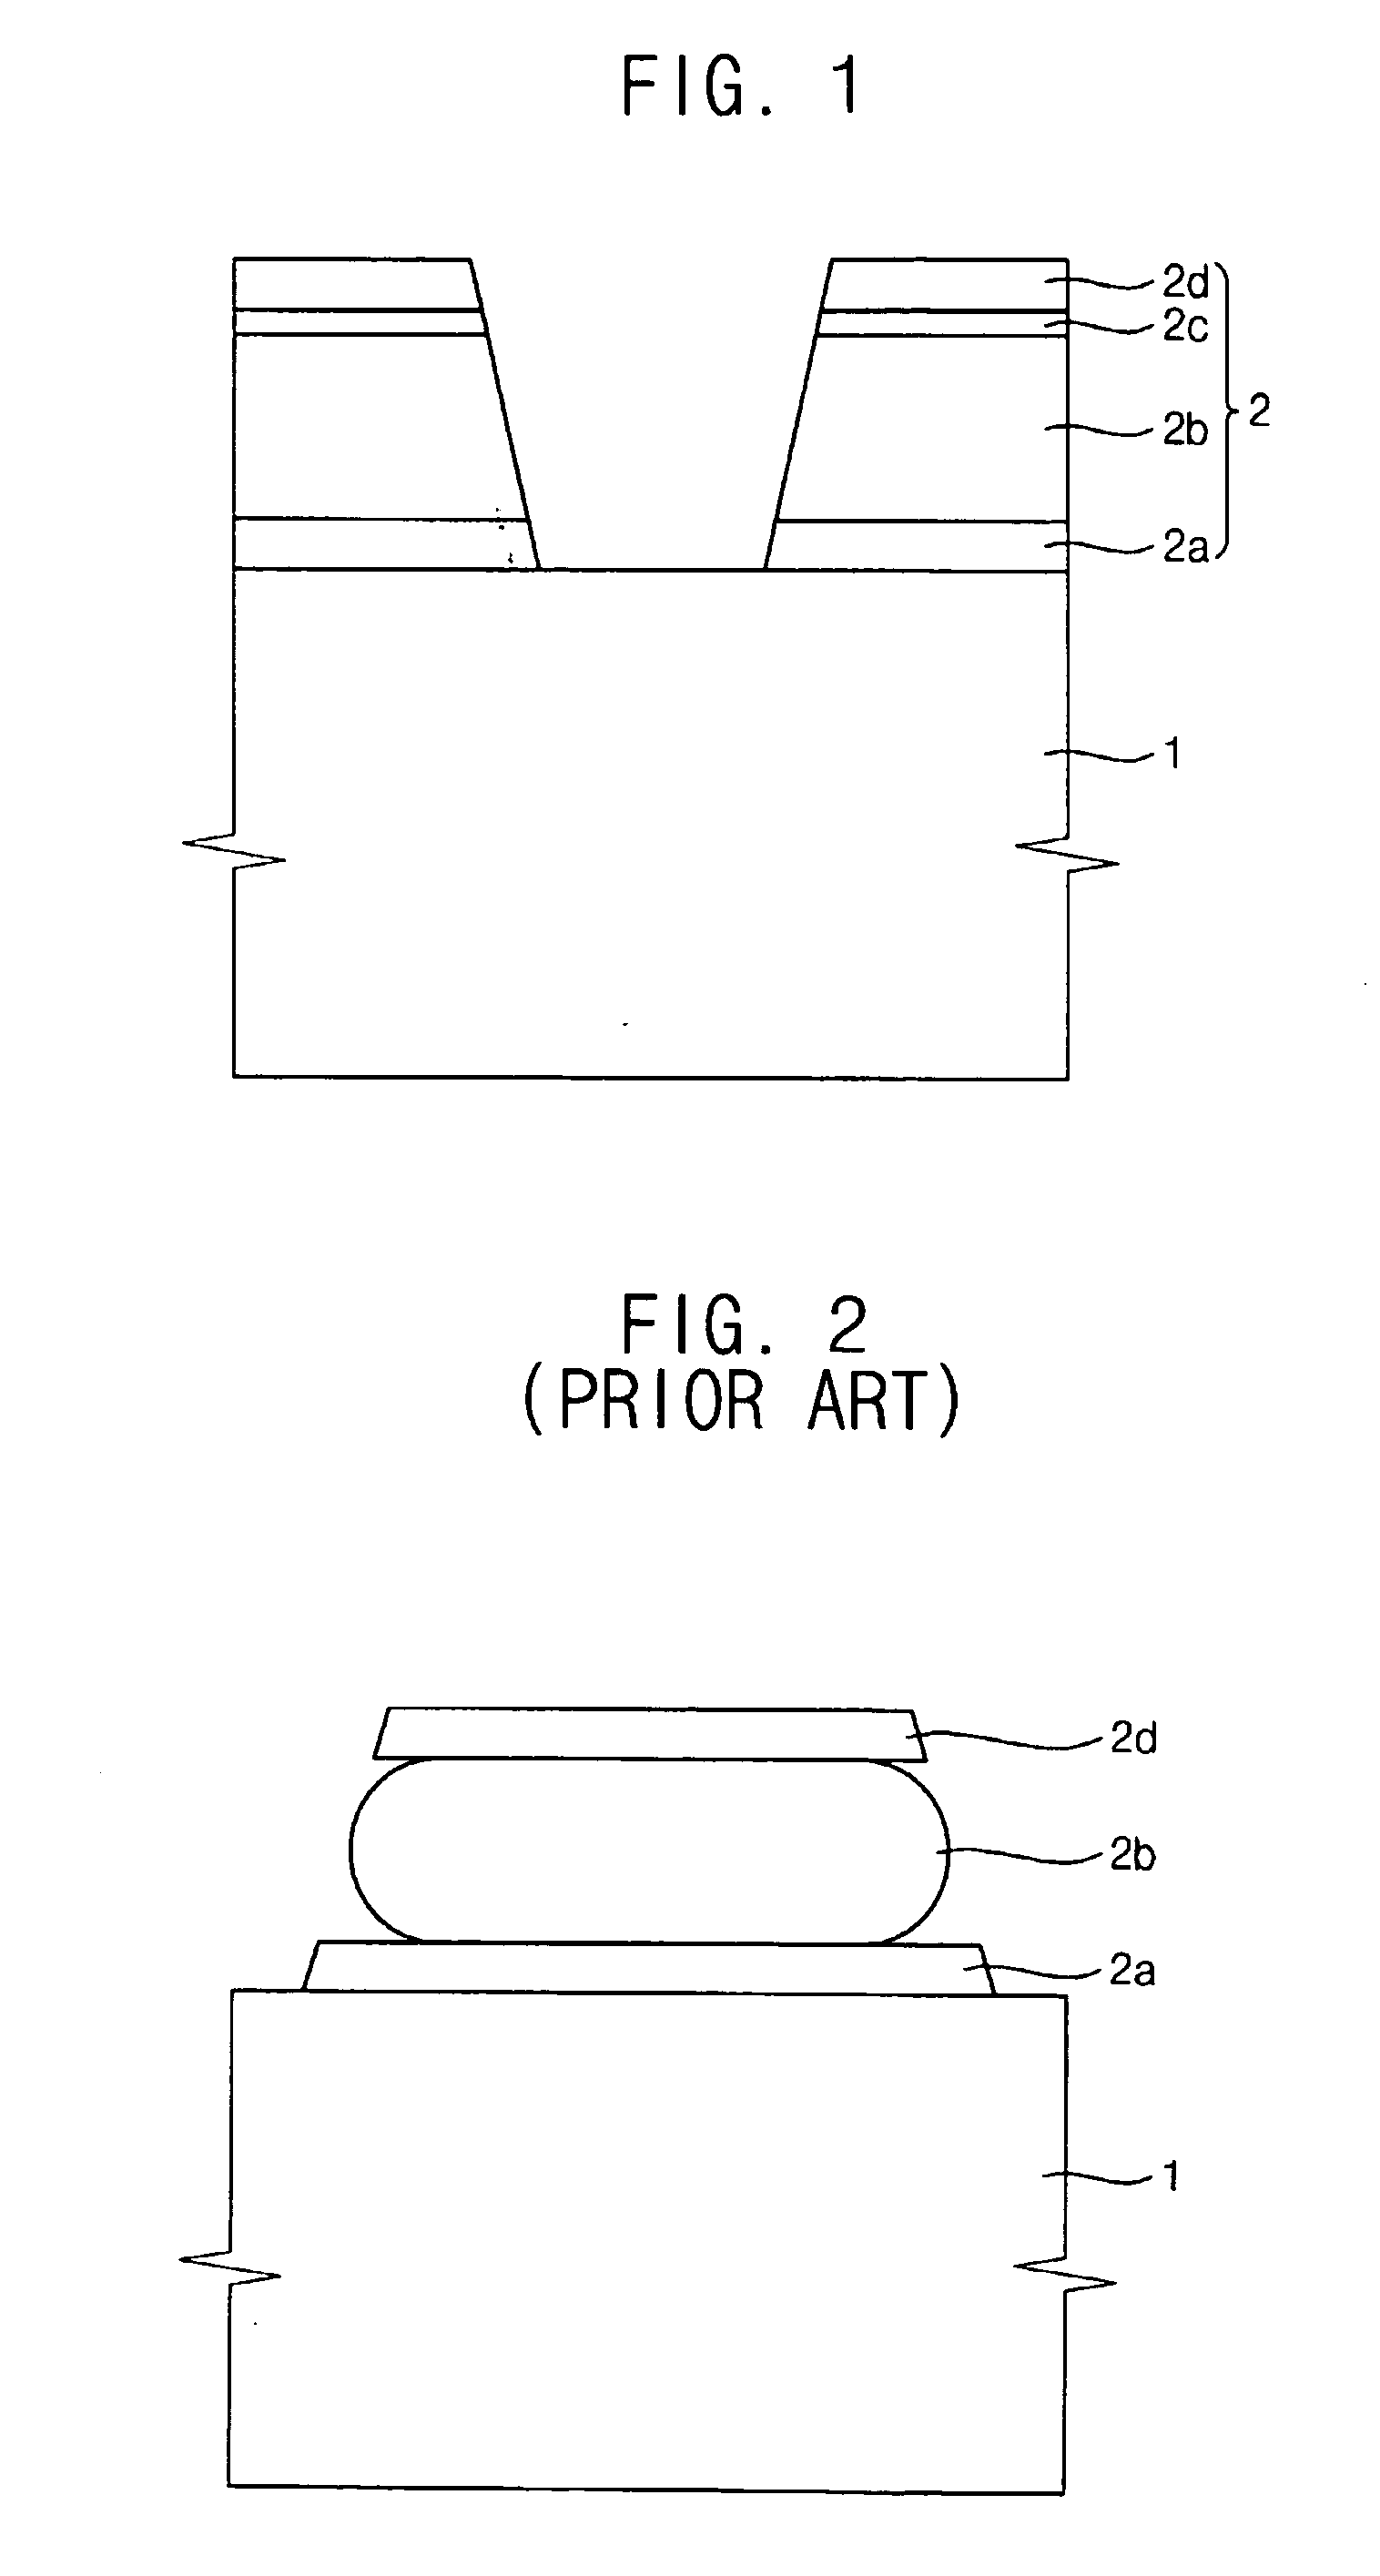 Thin film transistor substrate for display